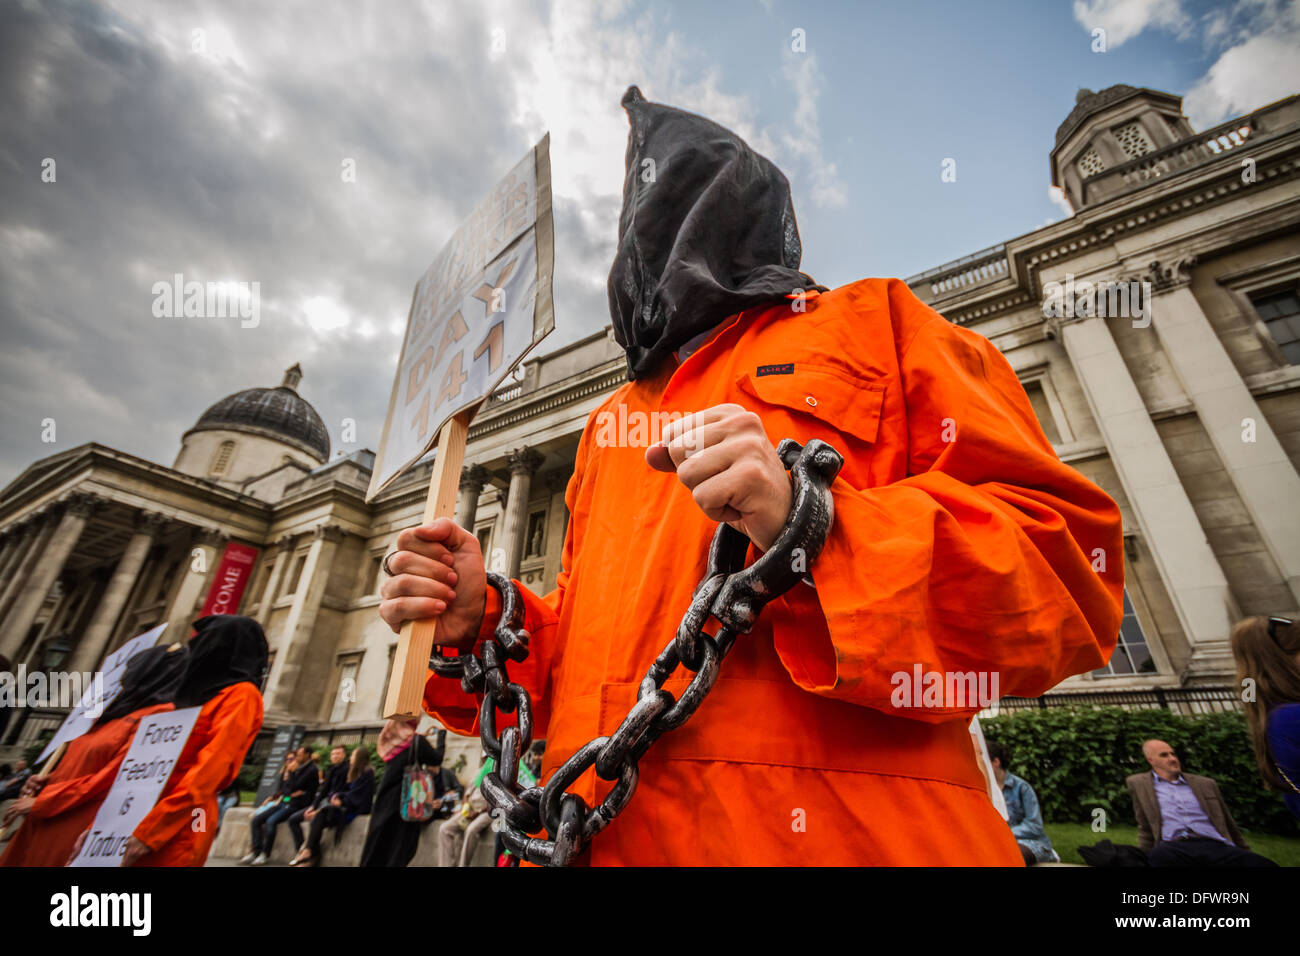 Supporters dressed in Guantanamo Bay detention camp suits attend International Day against Torture in London's Trafalgar Square, UK Stock Photo